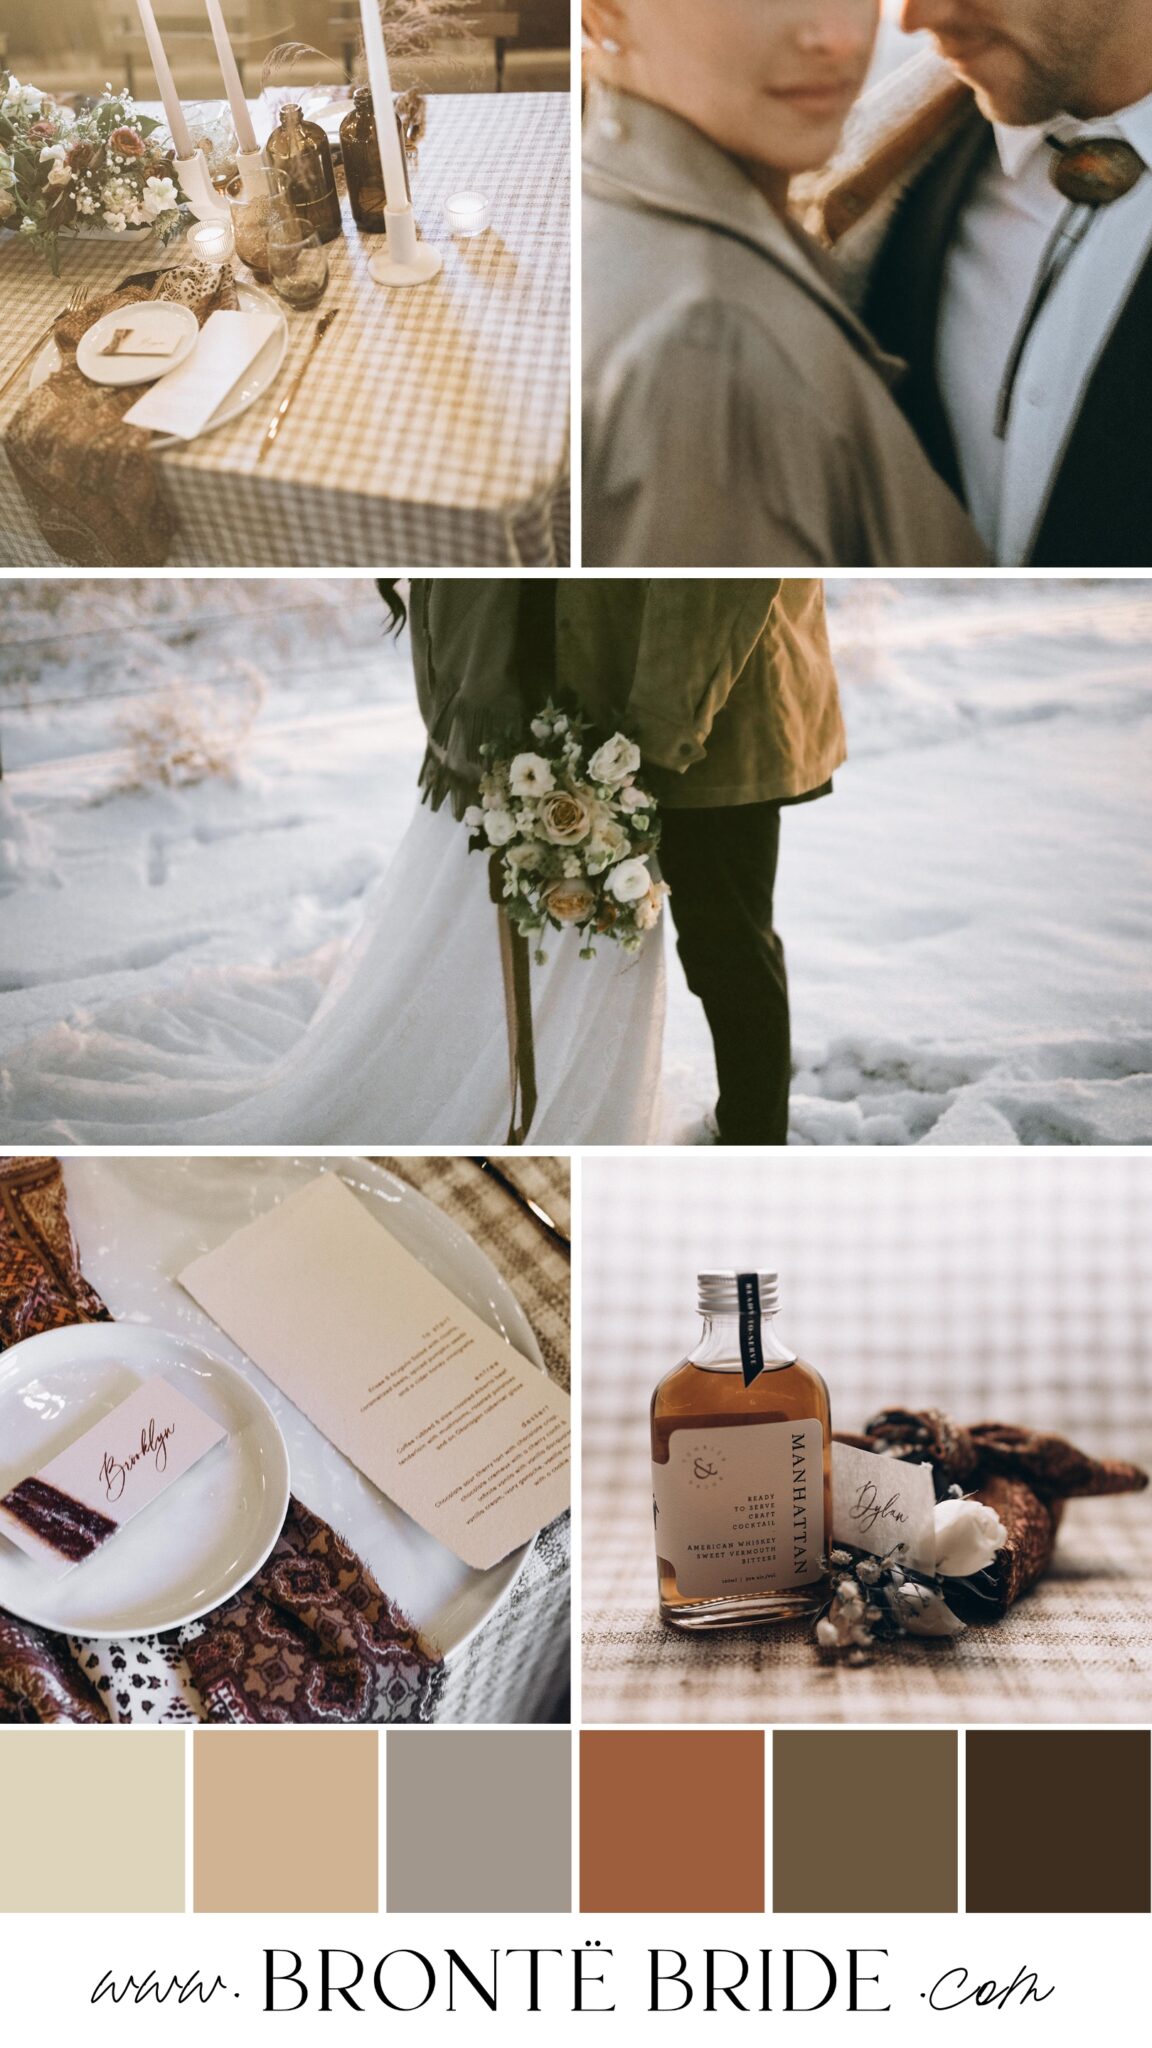 Country Chic Wedding Inspiration & Colour Palette Ideas | Wedding Inspiration & Mood Board from the Bronte Bride Blog; Winter wedding inspiration in Alberta with a warm brown and taupe romantic colour palette, warm neutral colour scheme